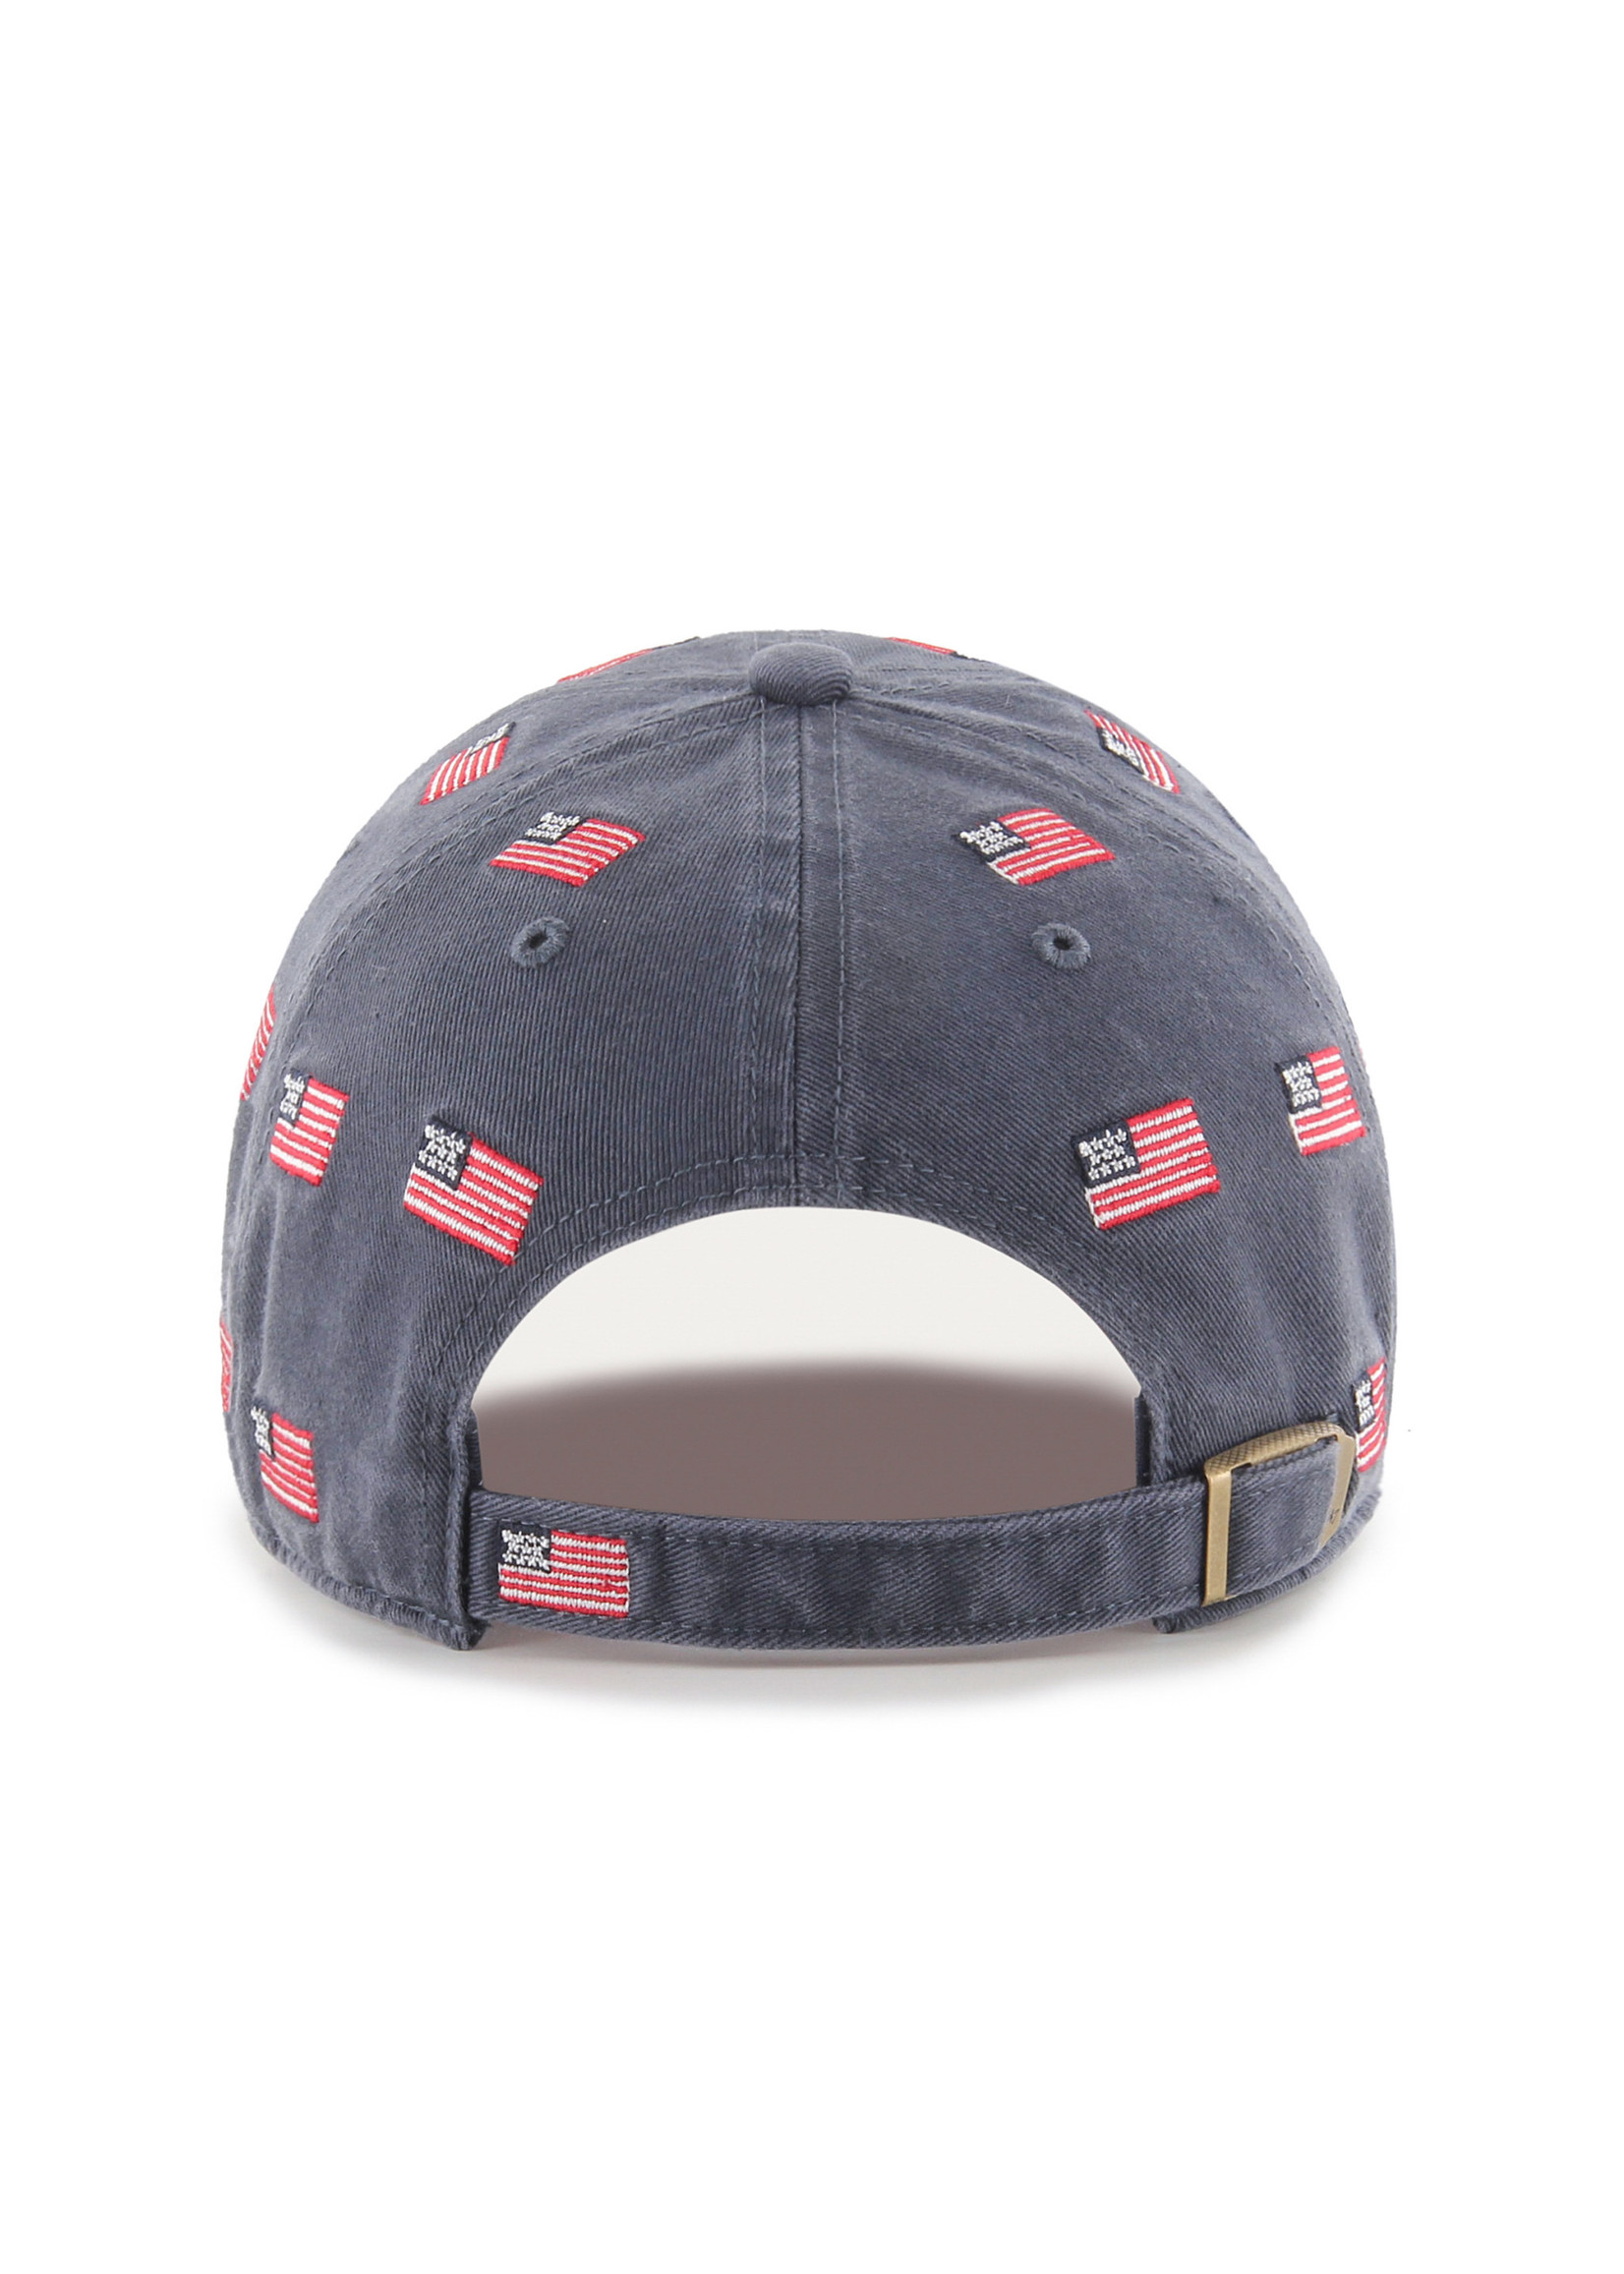 '47 Brand Red Sox Hat - Flag Pattern